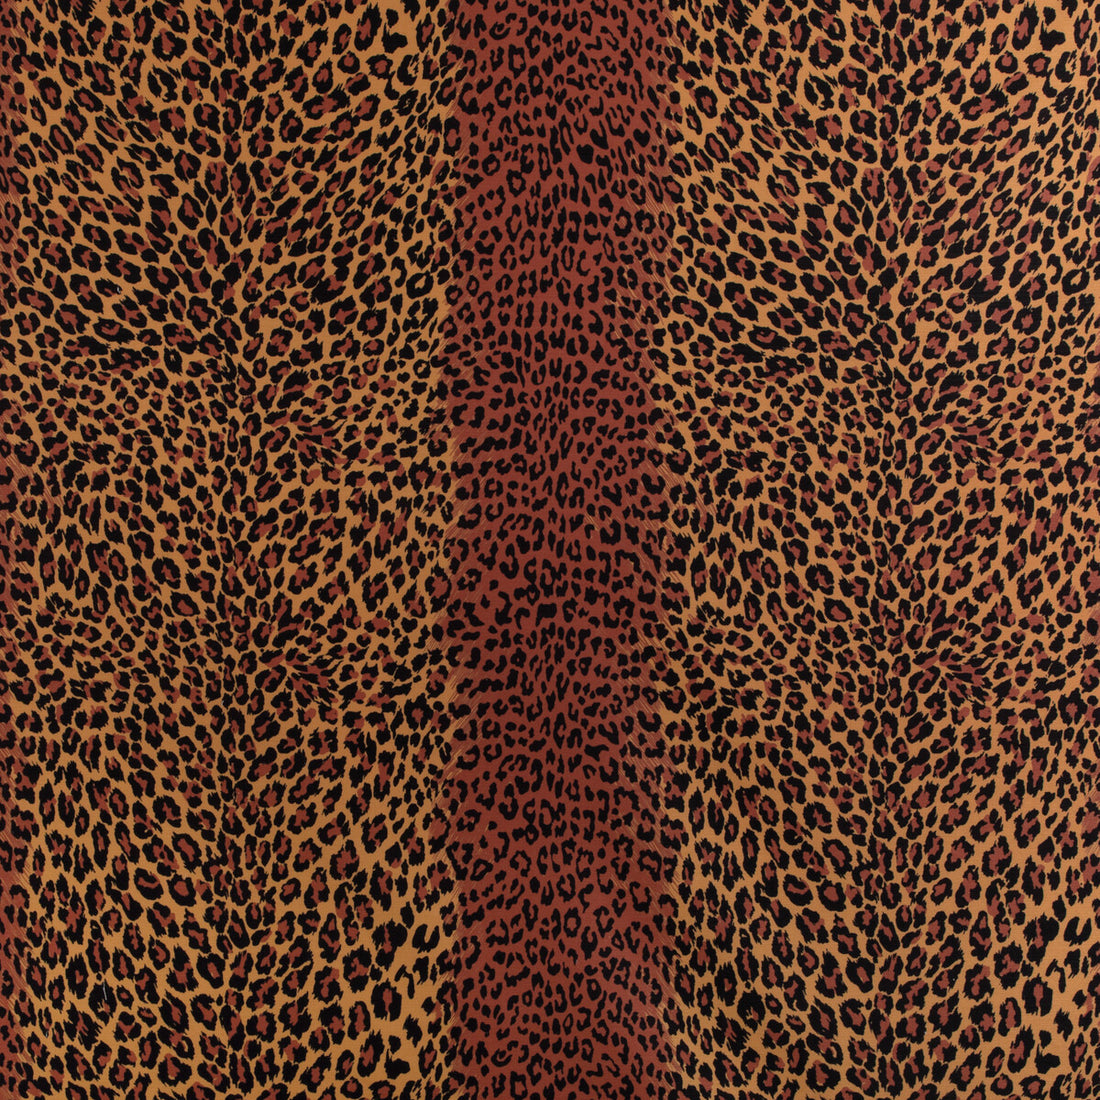 Leopard II fabric in chocolate color - pattern 8023125.46.0 - by Brunschwig &amp; Fils in the Madeleine Castaing Indoor/Outdoor collection